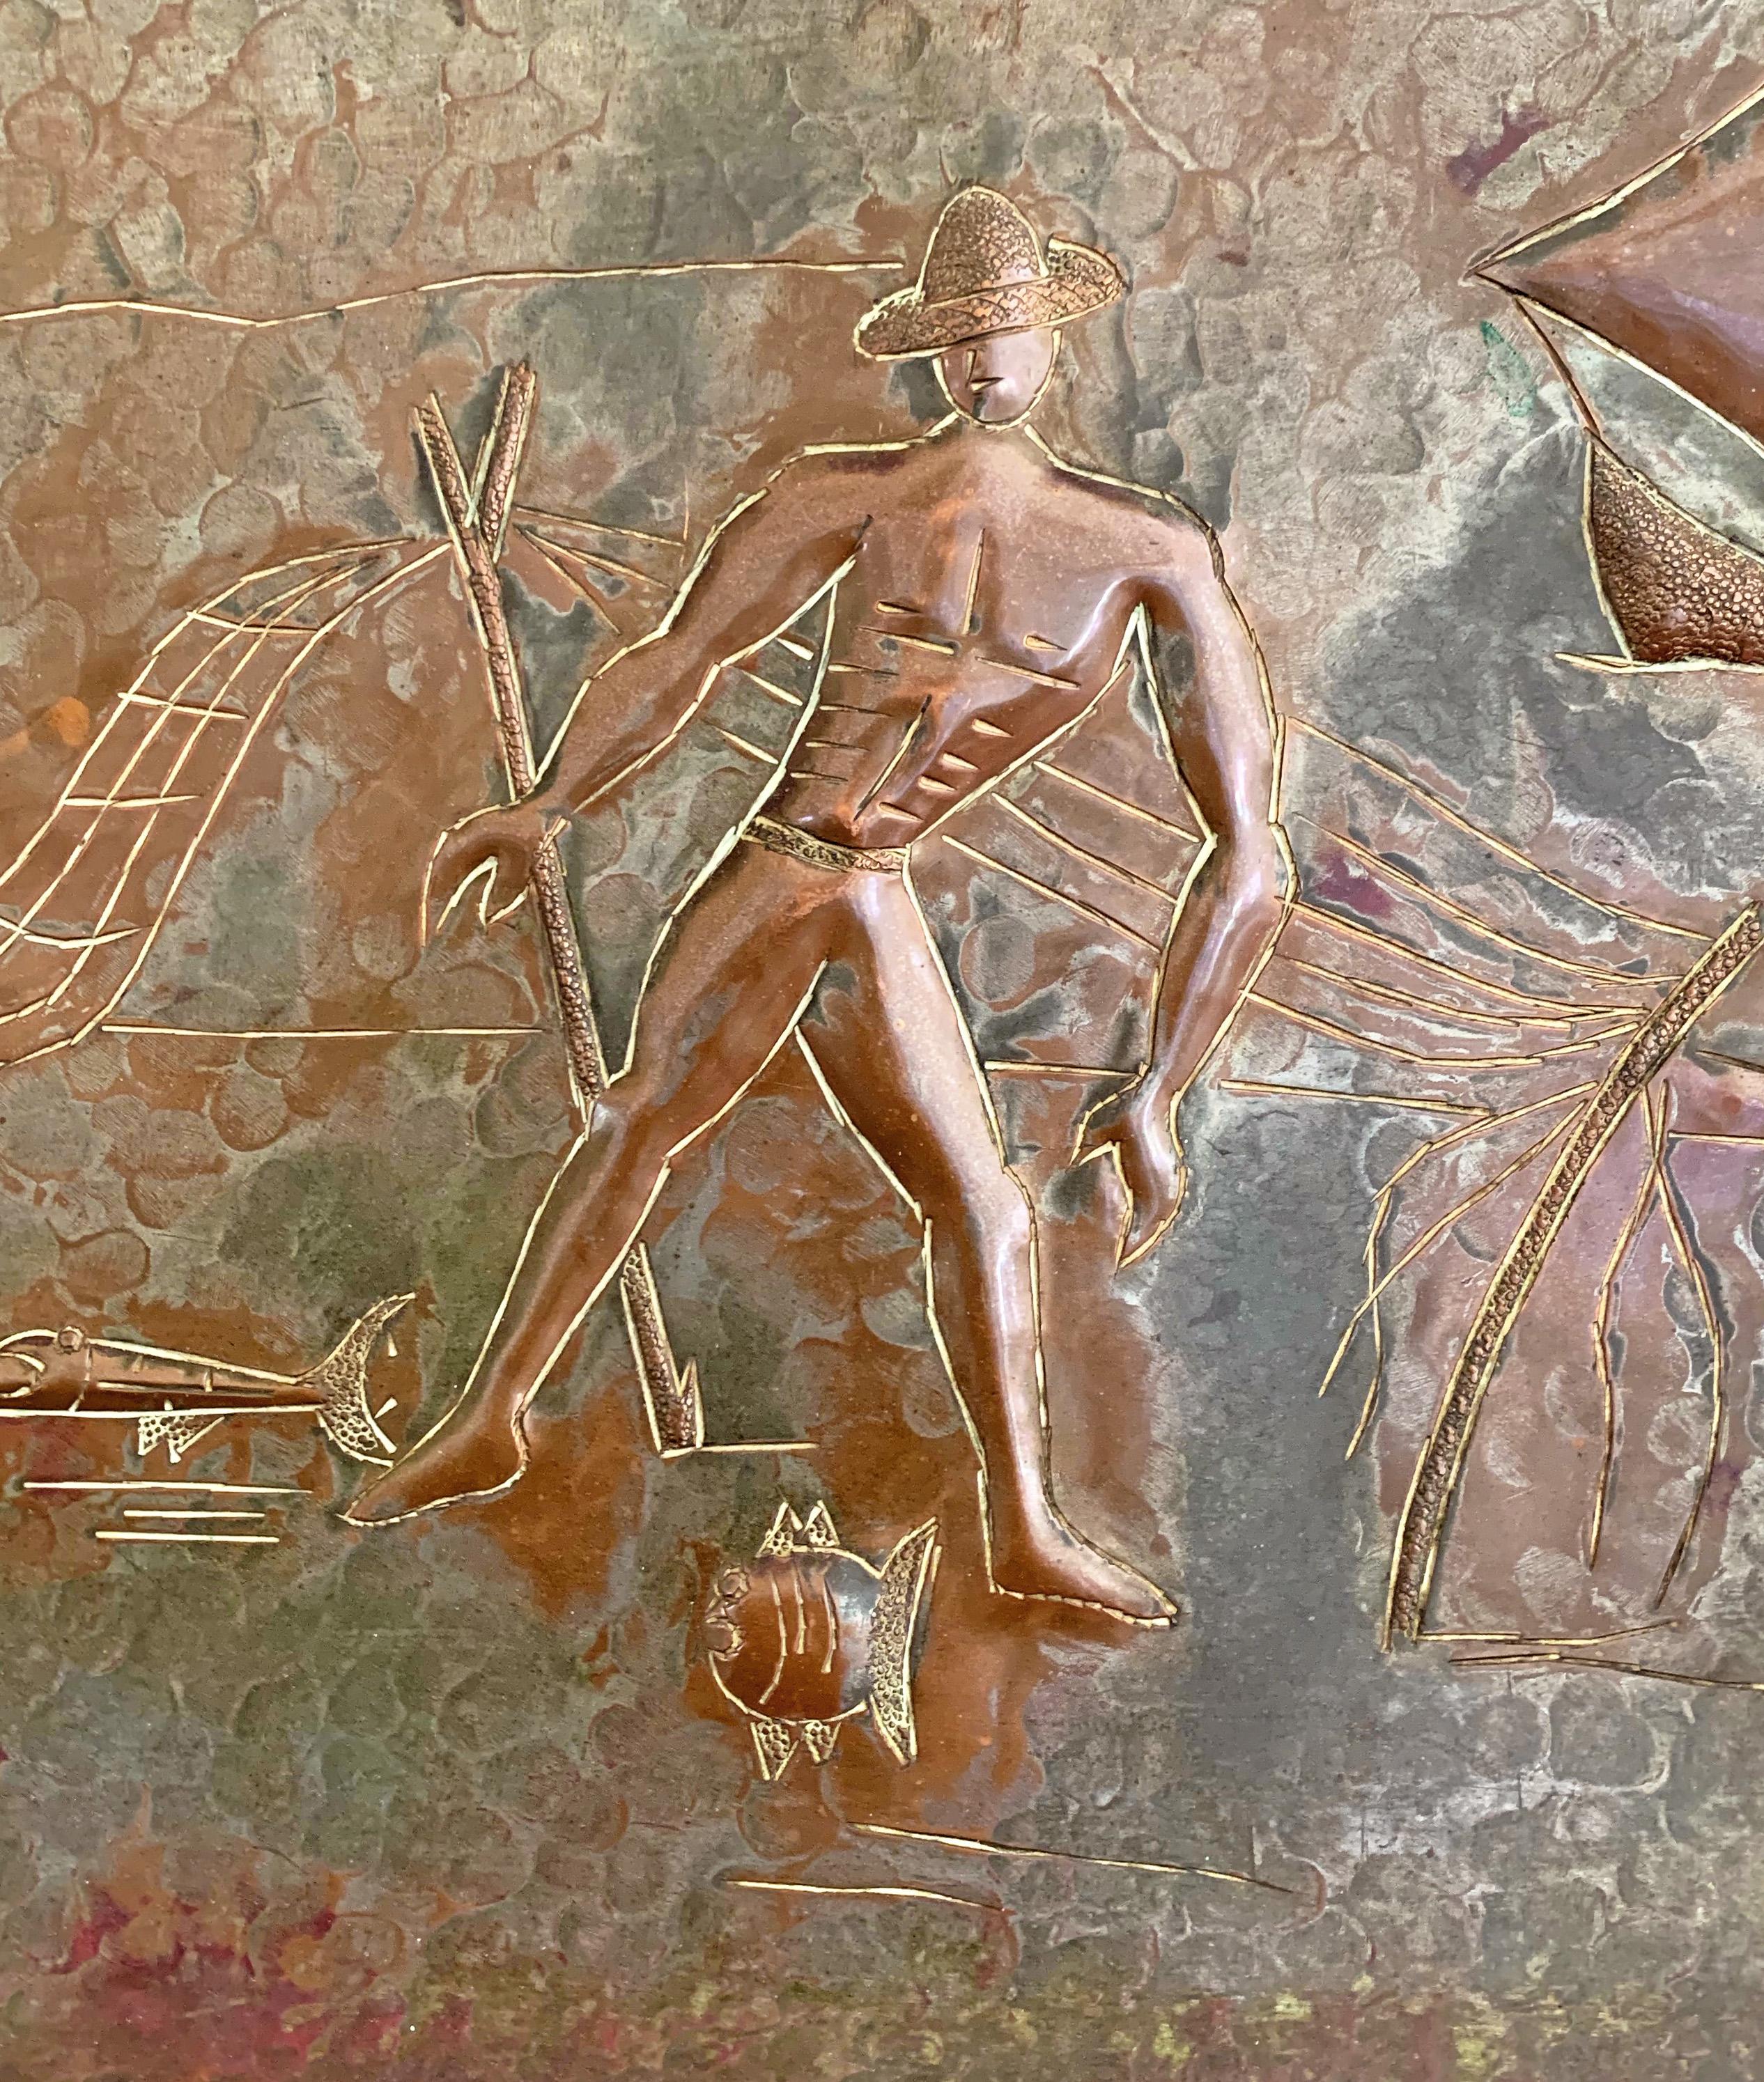 This rare and brilliantly-worked copper panel depicting a half-nude fisherman surrounded by a Middle Eastern townscape, exotic fish and a sailing boat, was created by A.N. Oppenheim, best known for producing high quality Judaica and enameled dishes